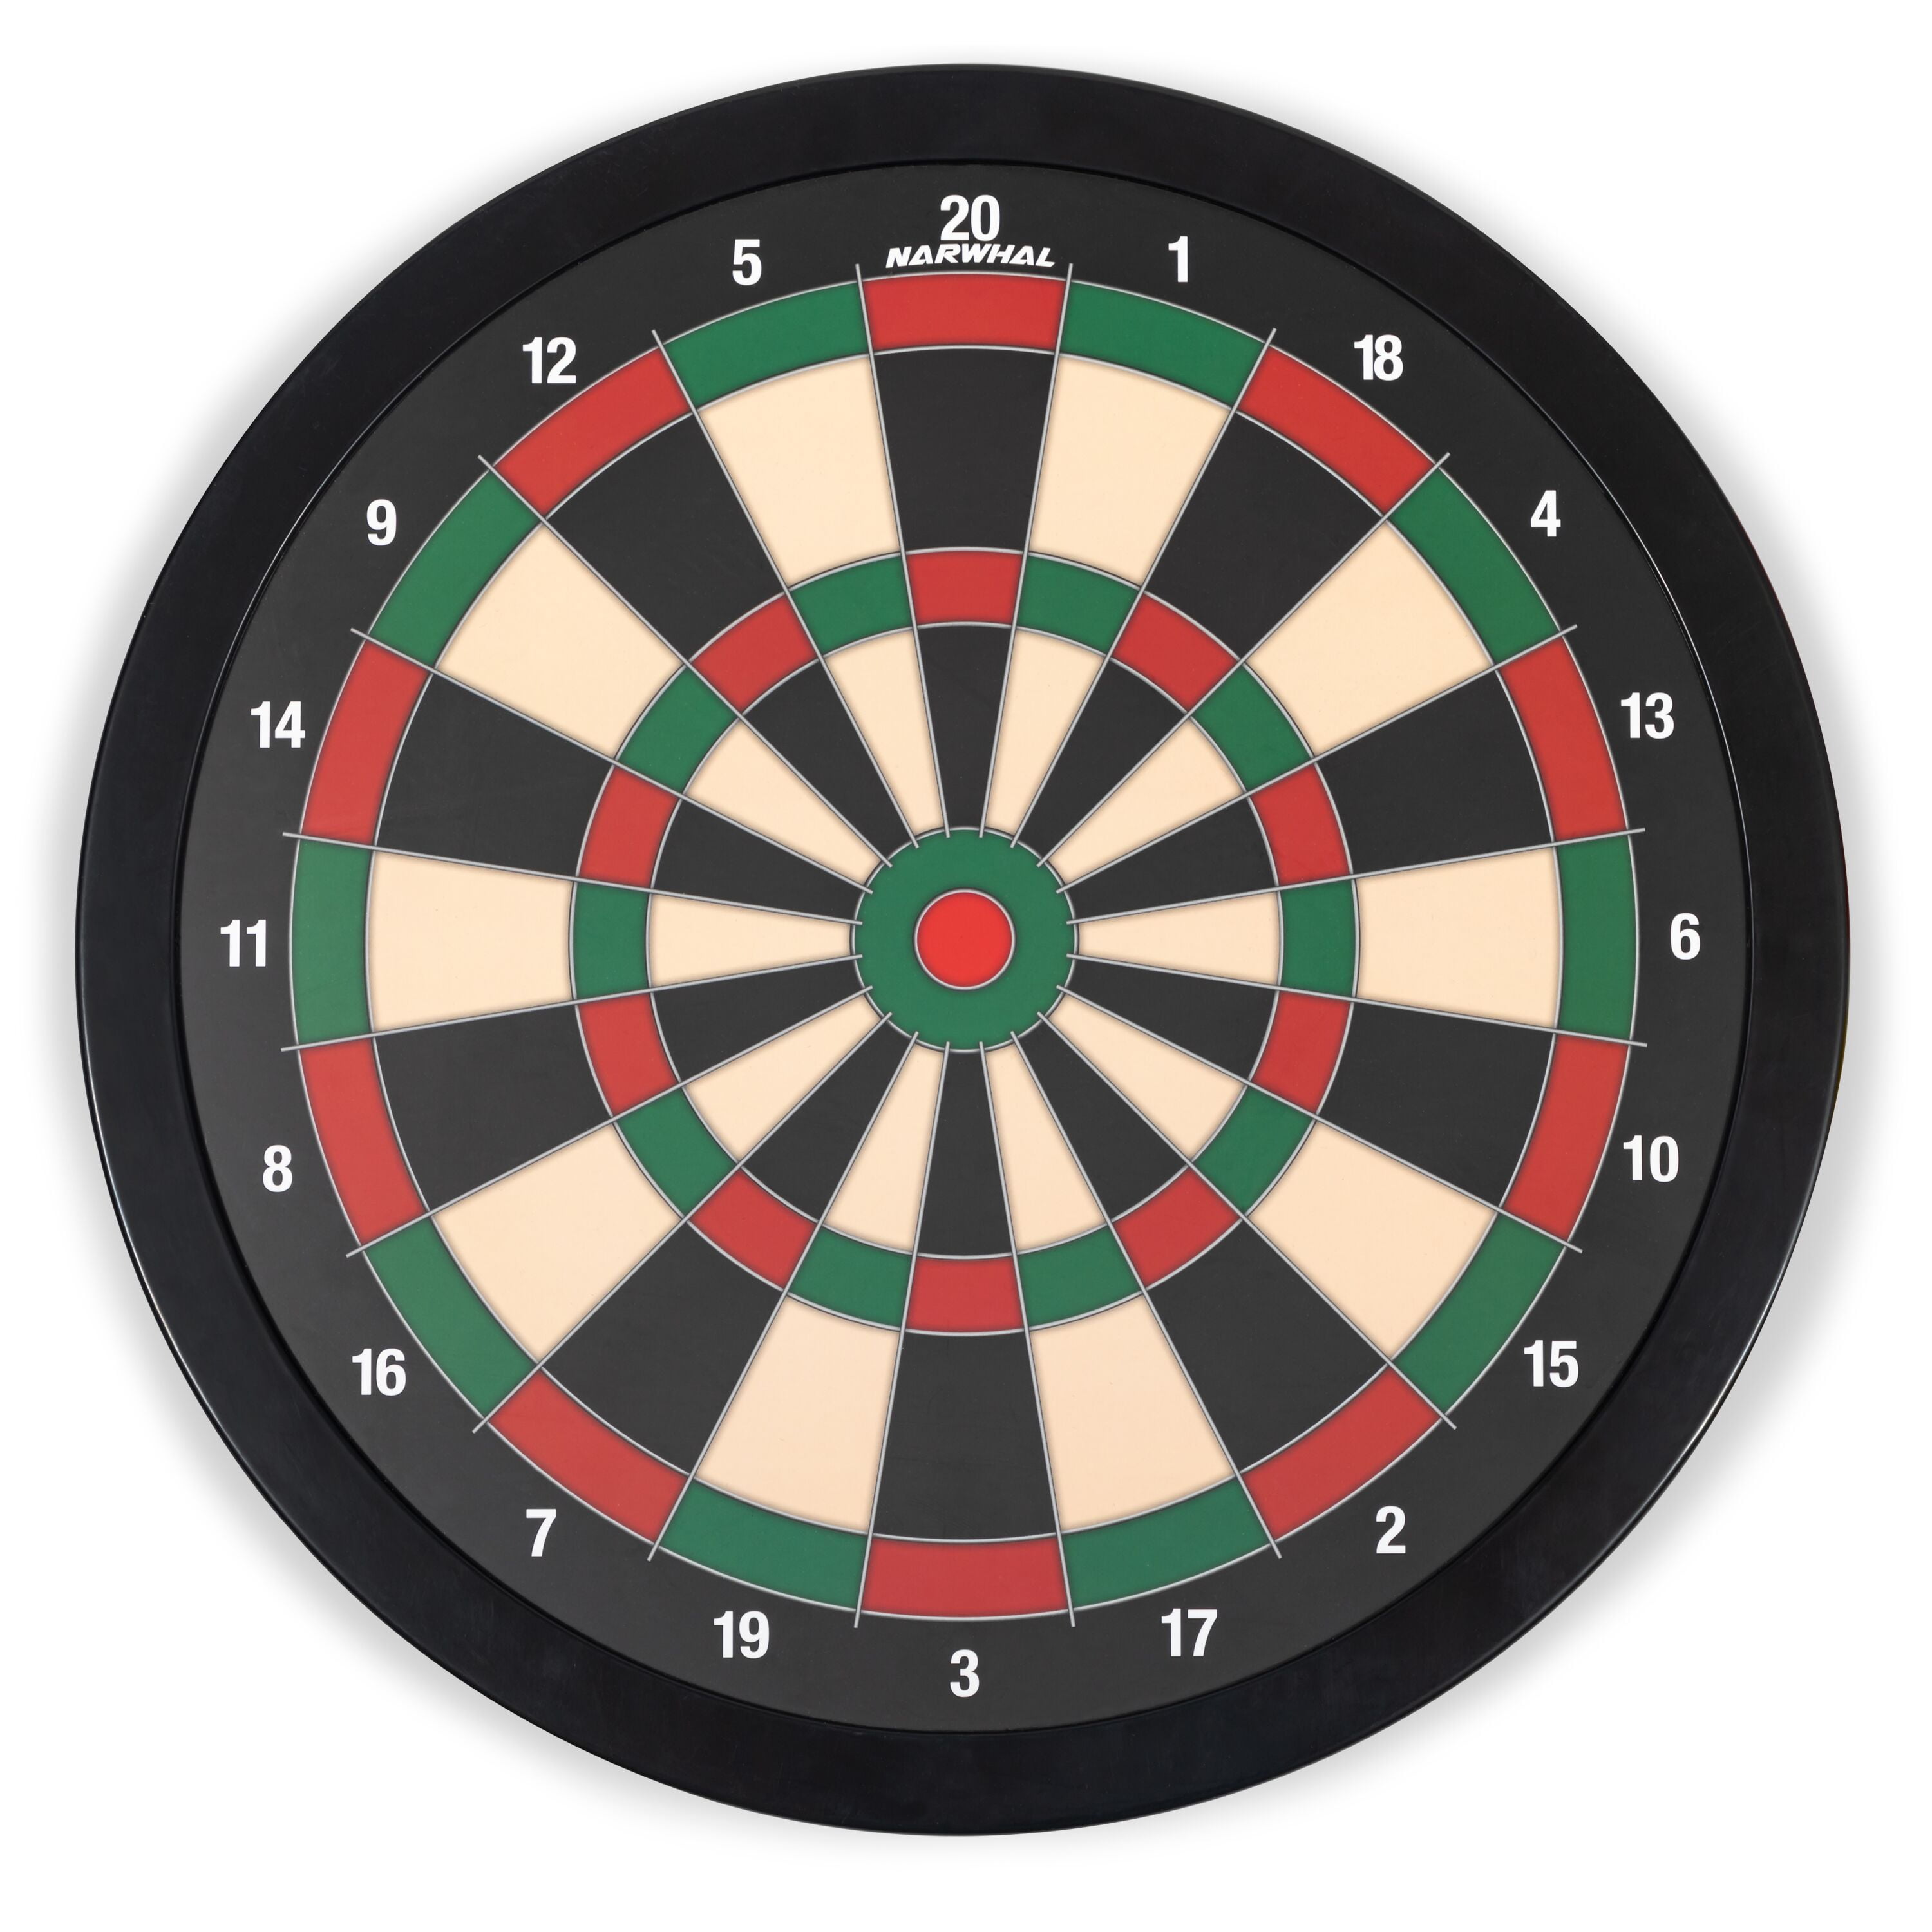 Details about   Arachnid Inter-Active 3000 Recreational 13" Electronic Dartboard Features 27 ... 